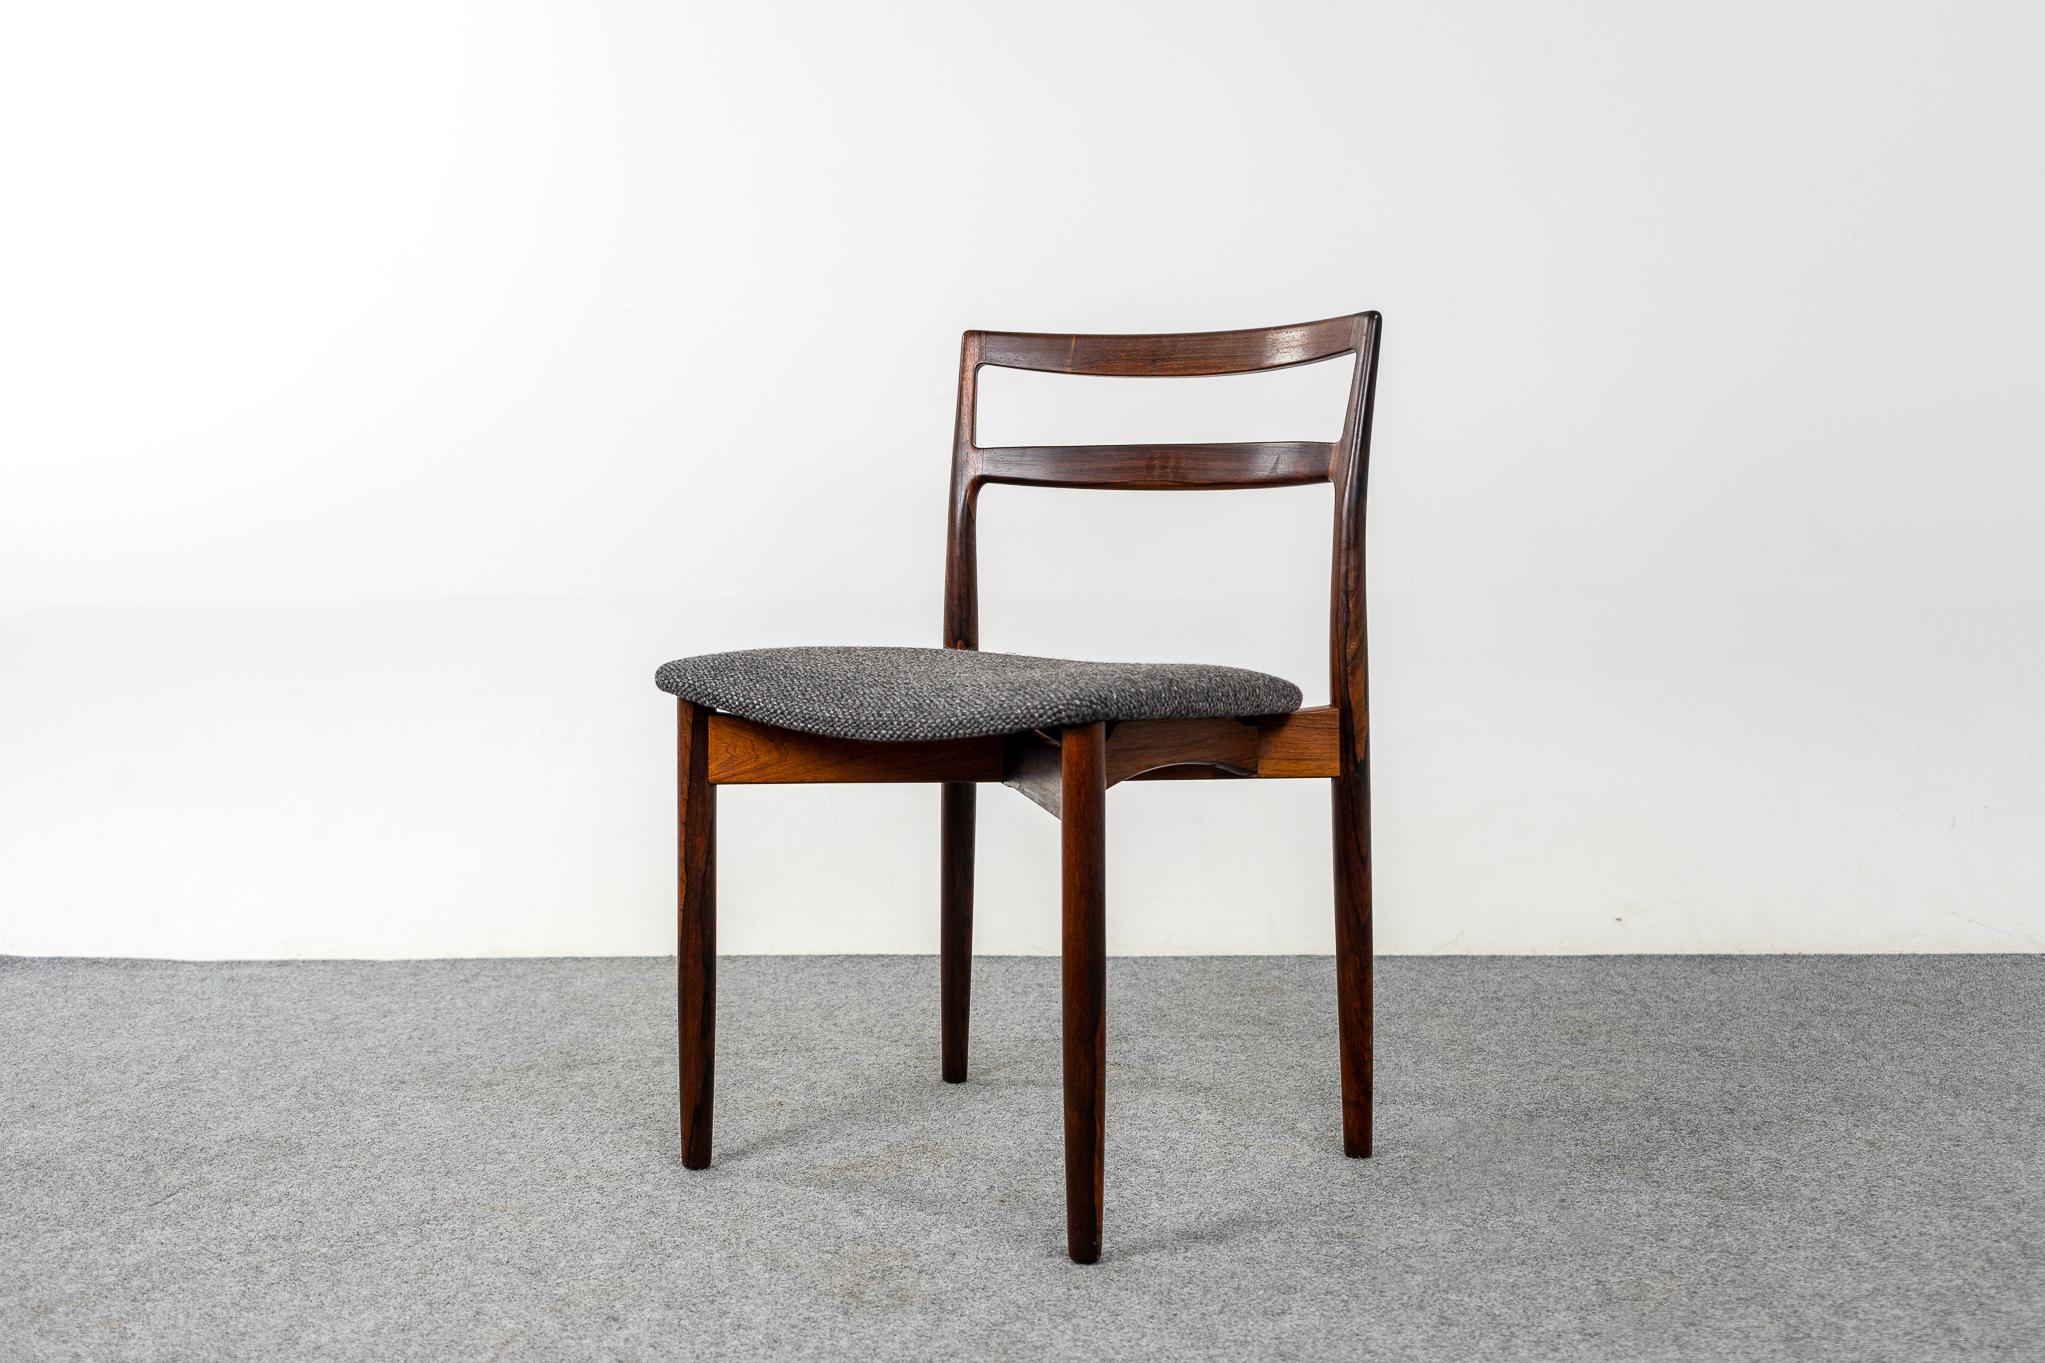 Set of 4 rosewood Danish dining chairs by Harry Ostergaard for Randers Mobelfabrik, circa 1960's. Beautifully curved backrests and generous seat design provide support and comfort. Floating seat design adds an air of lightness and elegance to the